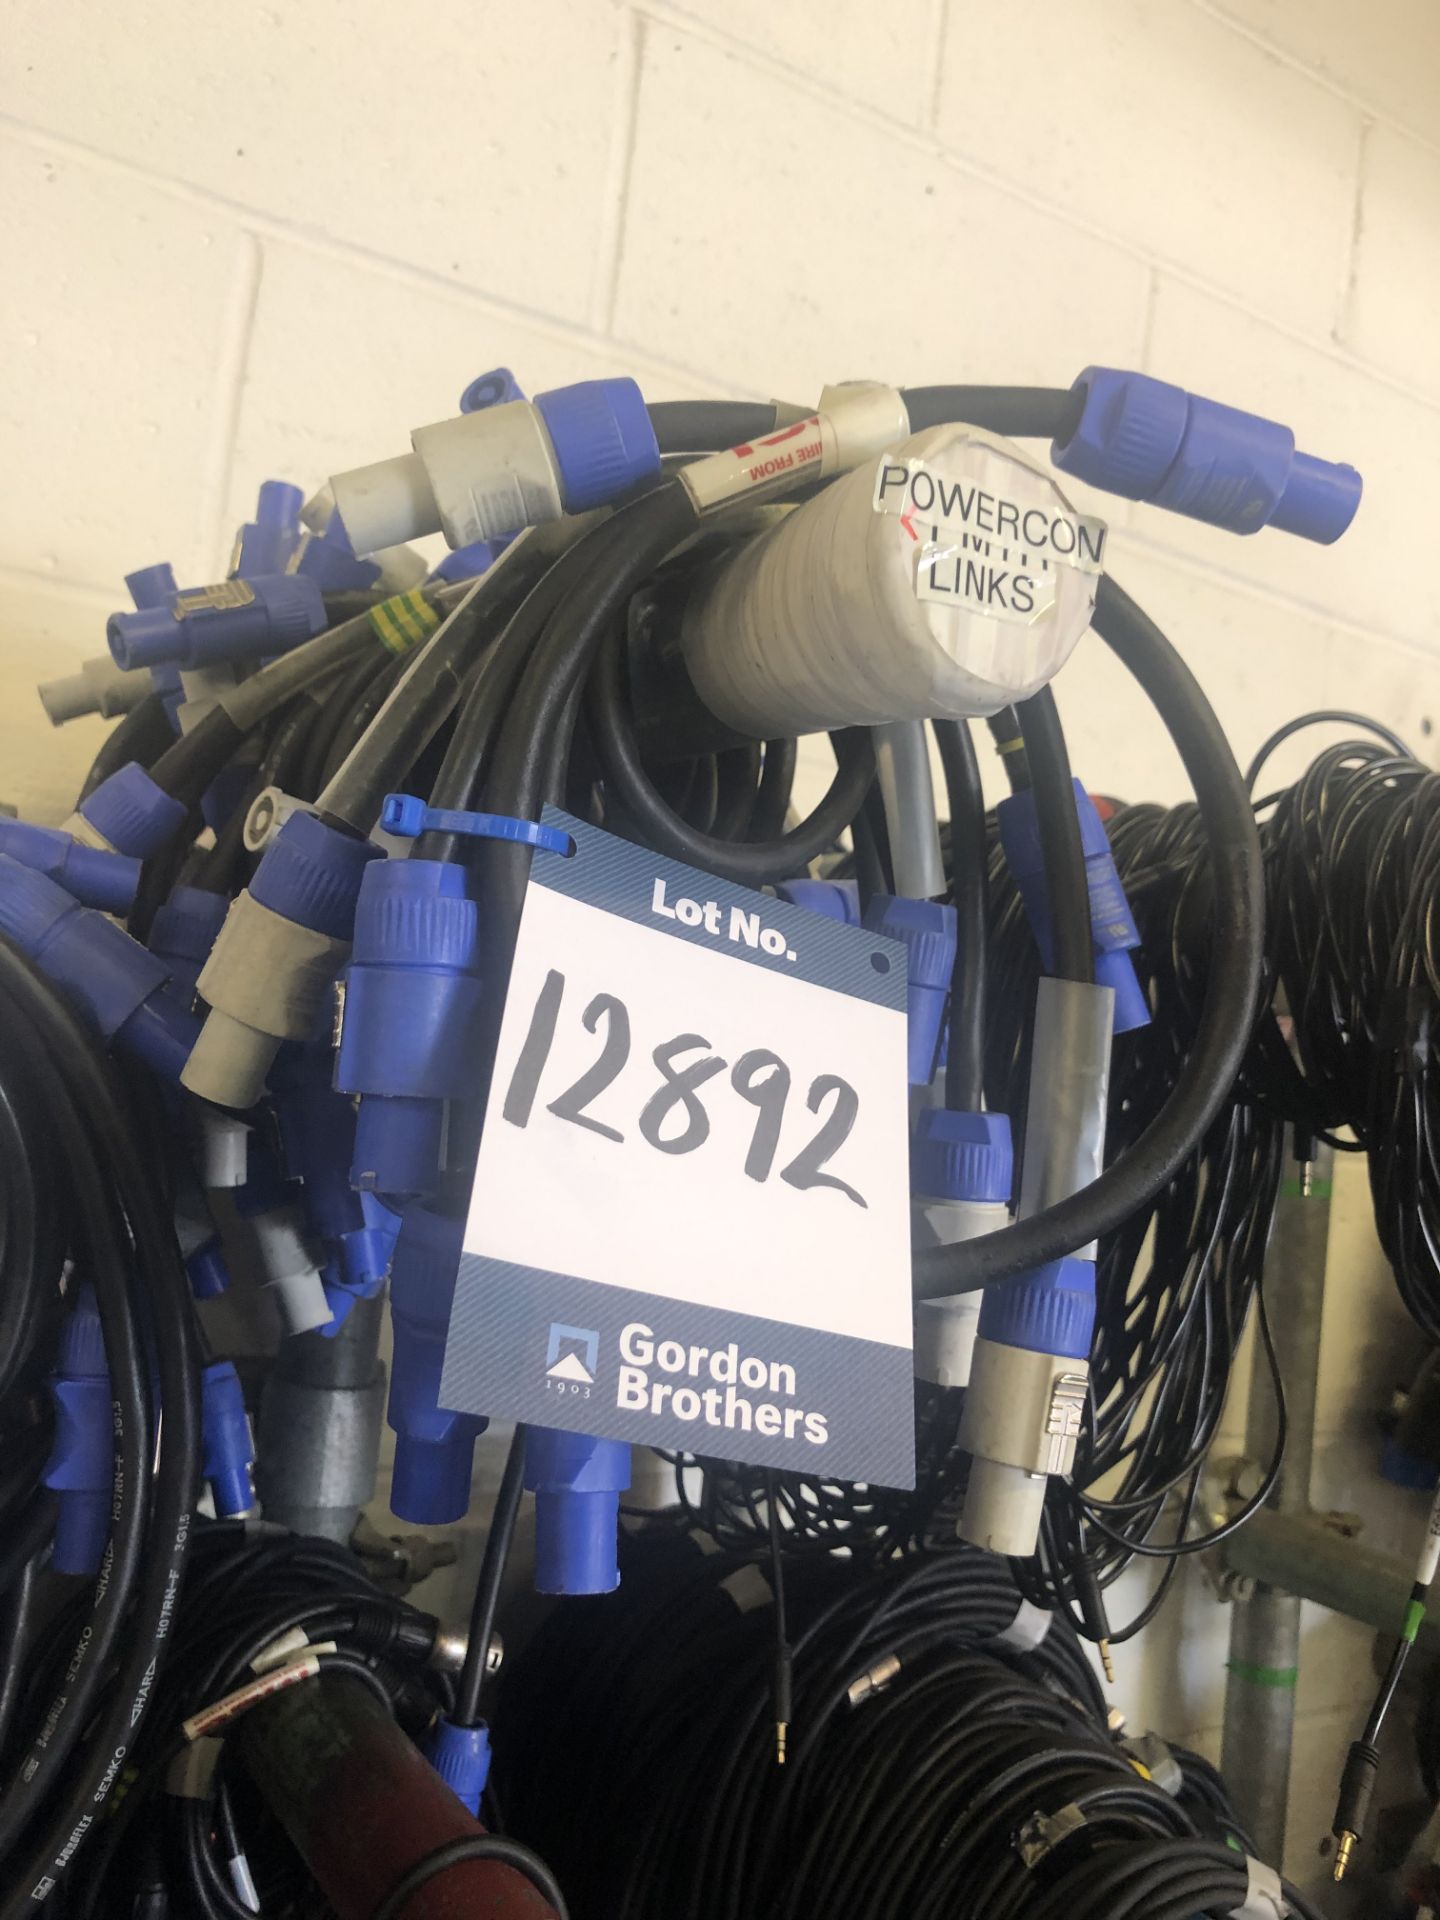 30x No. power comm link cables